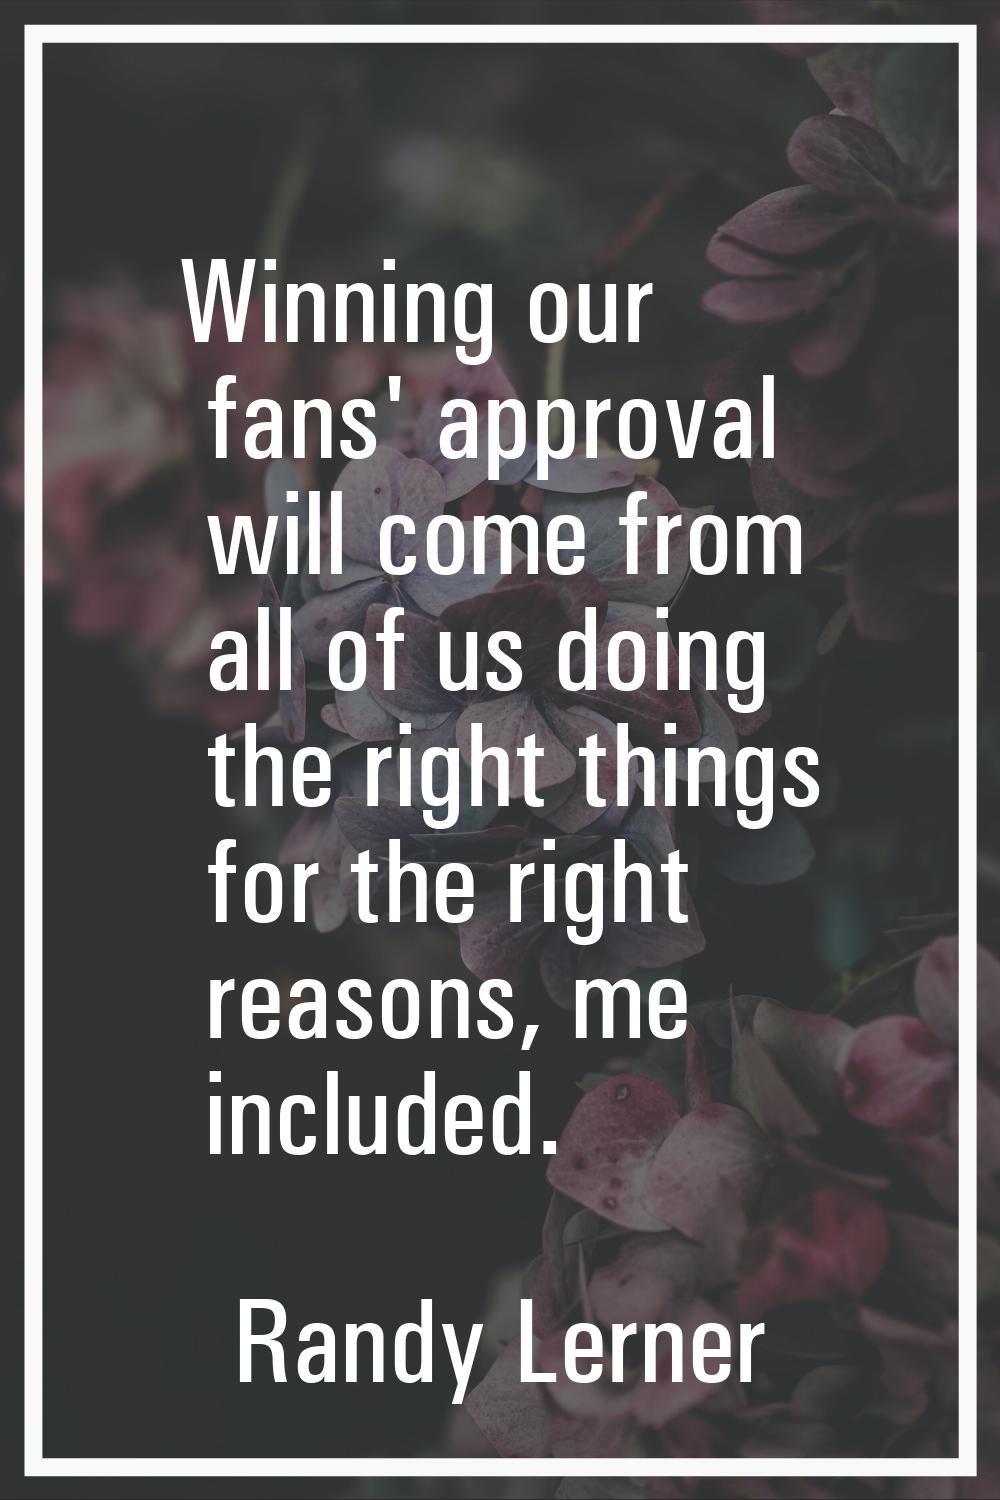 Winning our fans' approval will come from all of us doing the right things for the right reasons, m